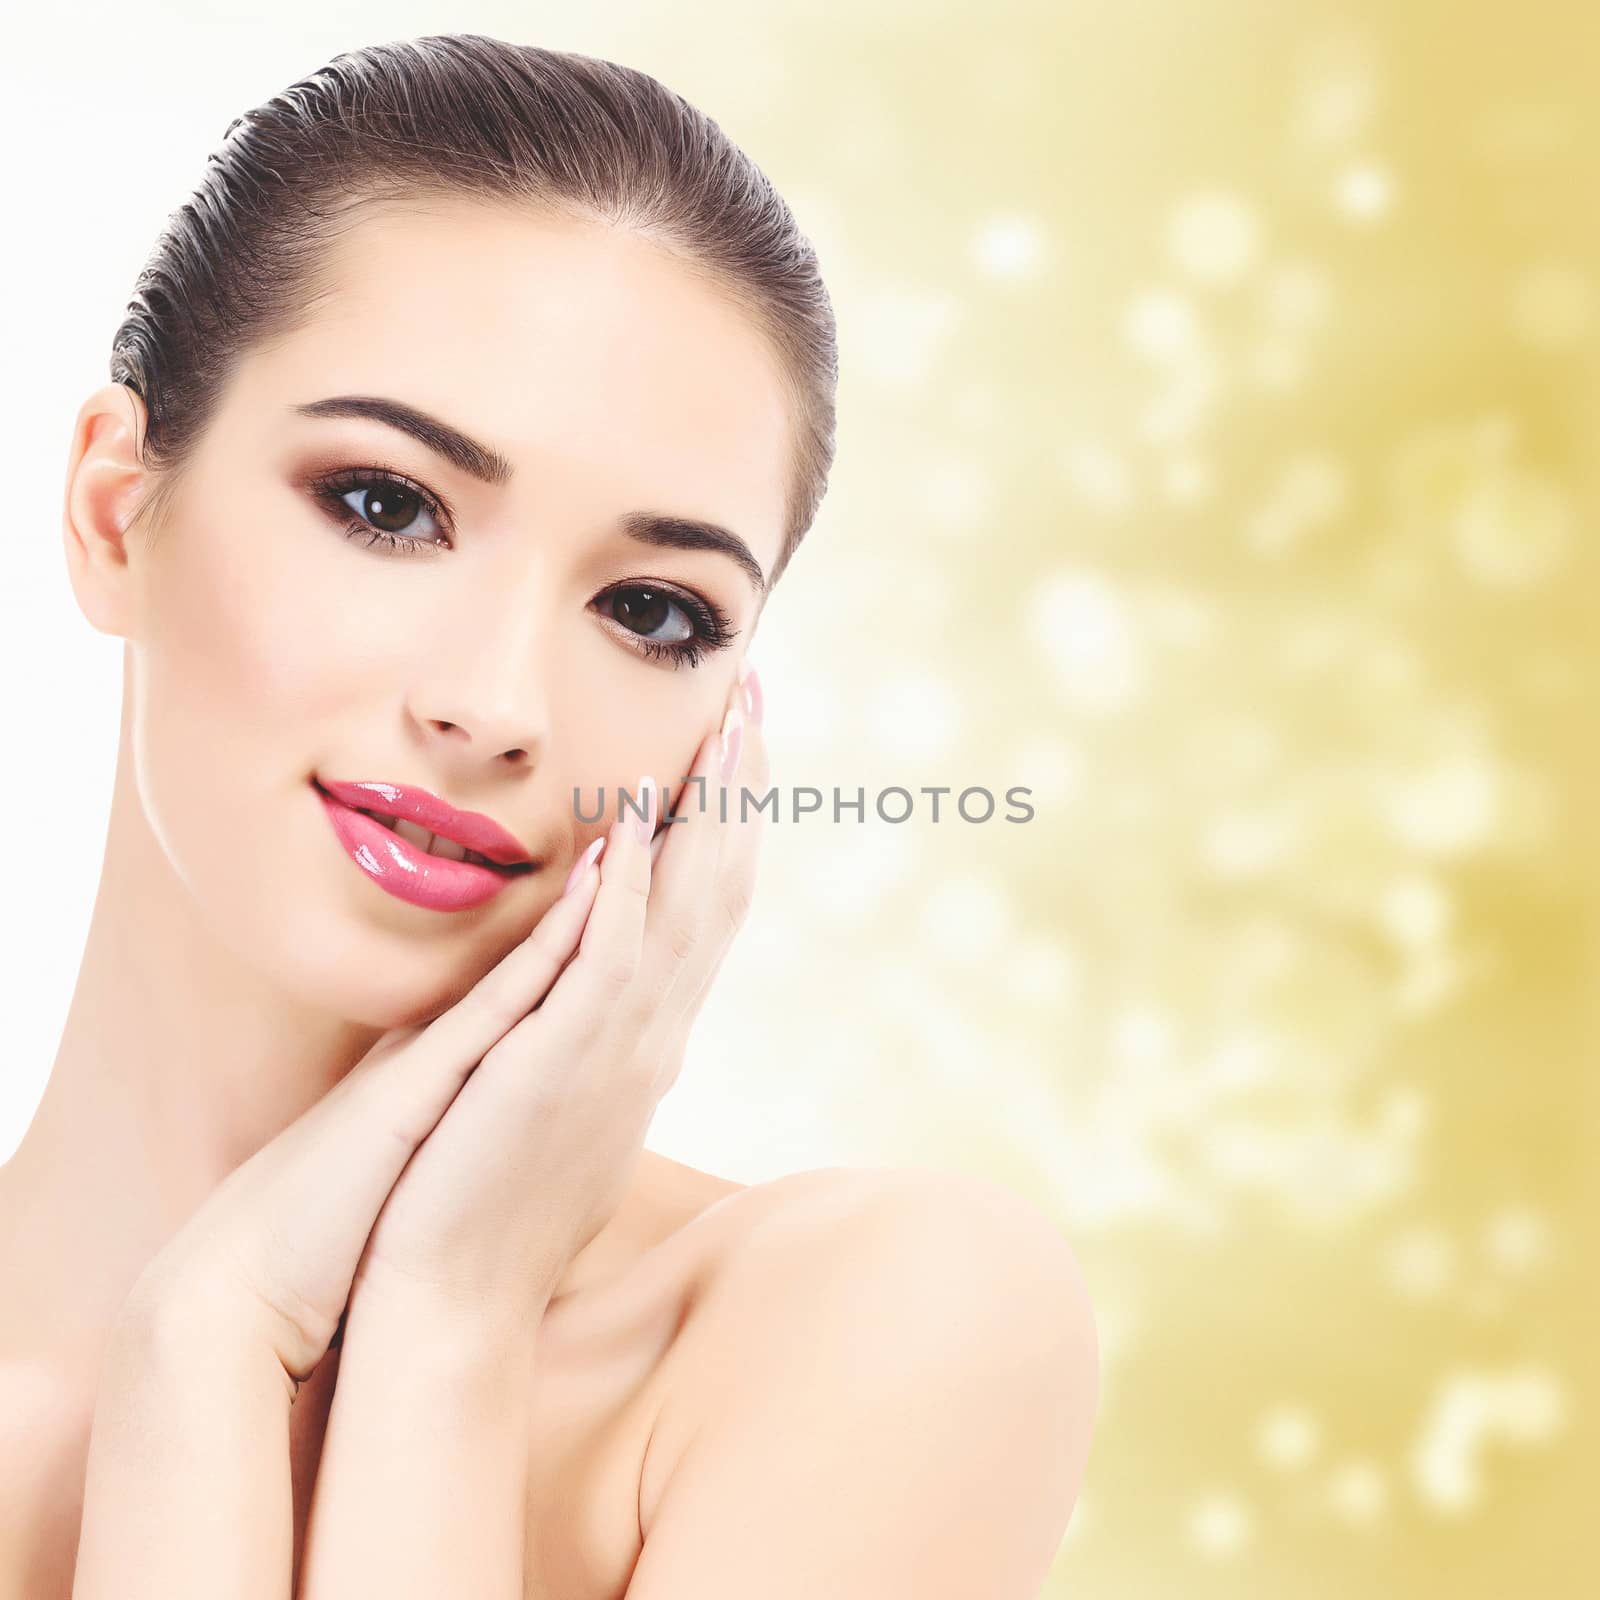 Beautiful girl with clean fresh skin, yellow background with blurred lights